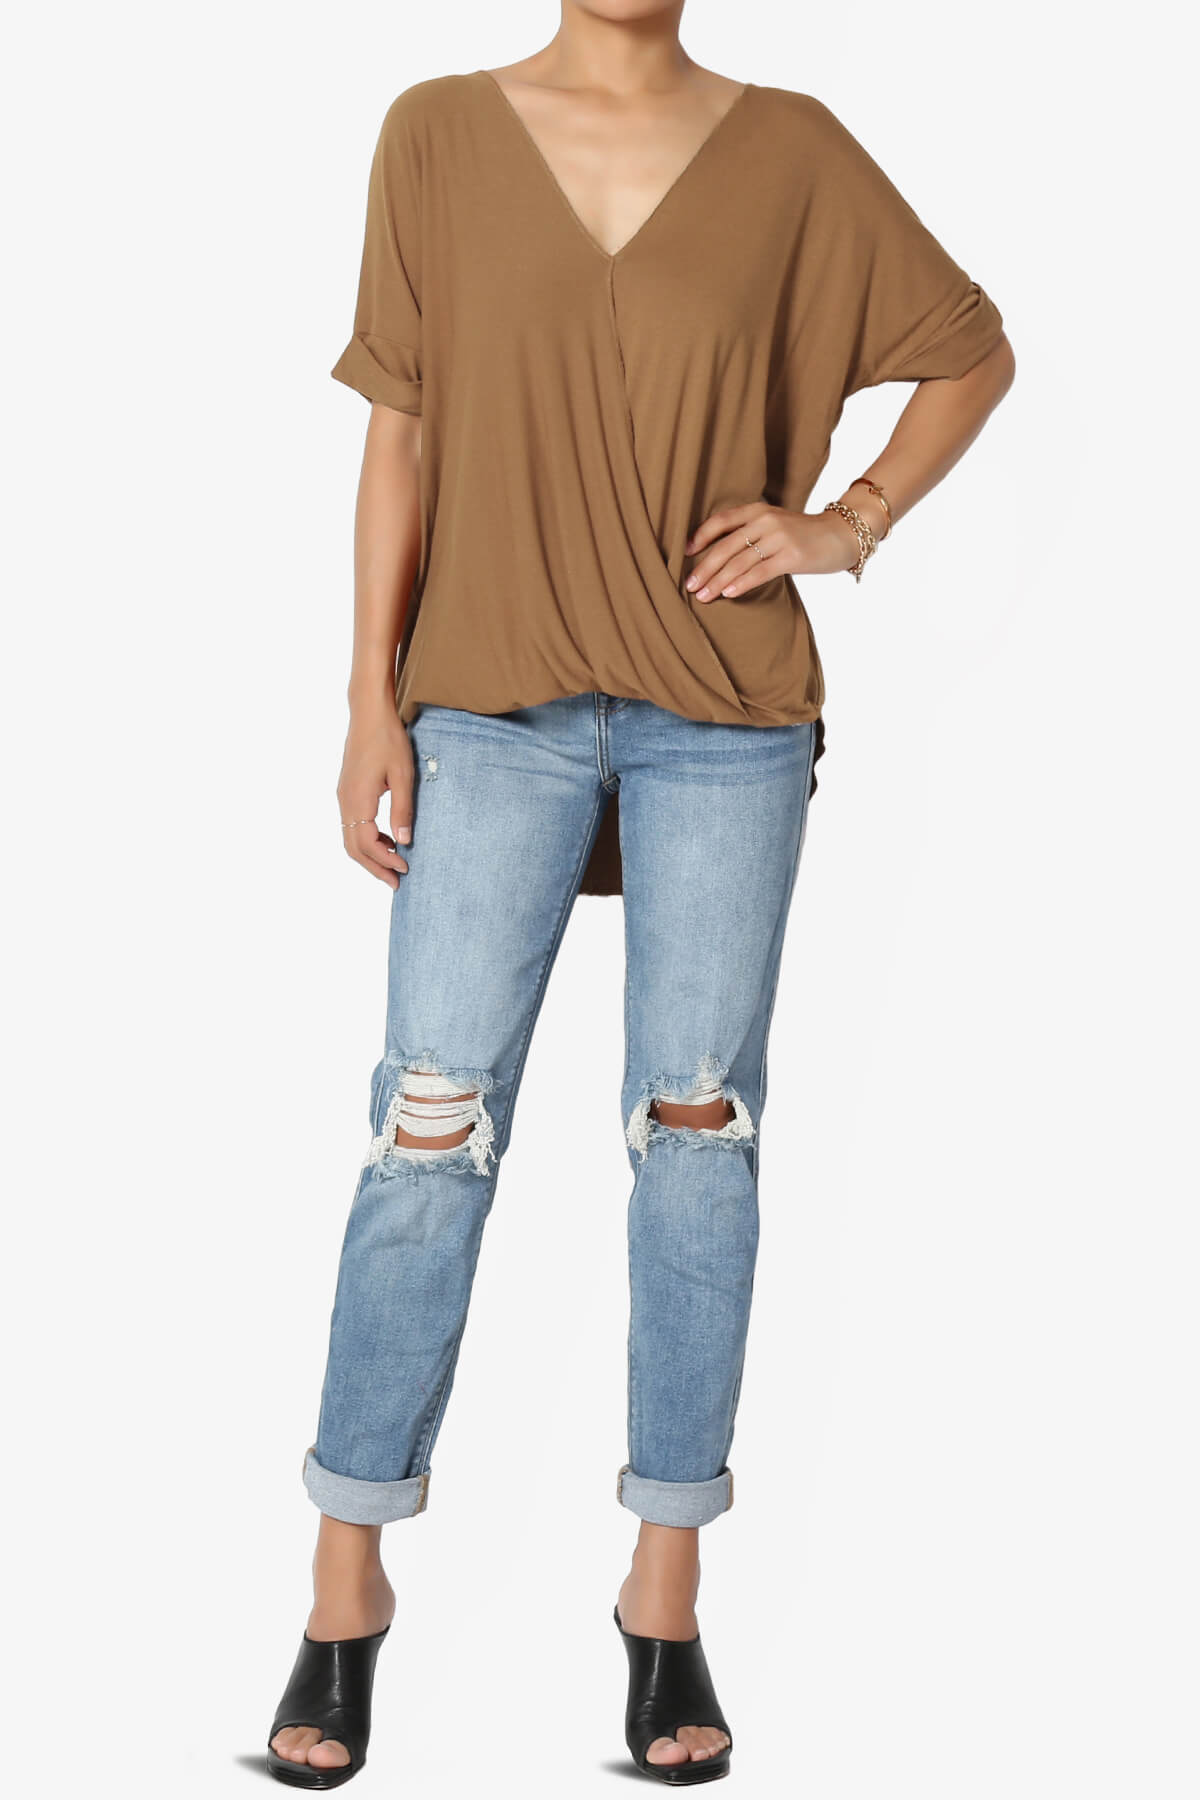 Load image into Gallery viewer, Tackle Wrap Hi-Low Crepe Knit Top DEEP CAMEL_6
